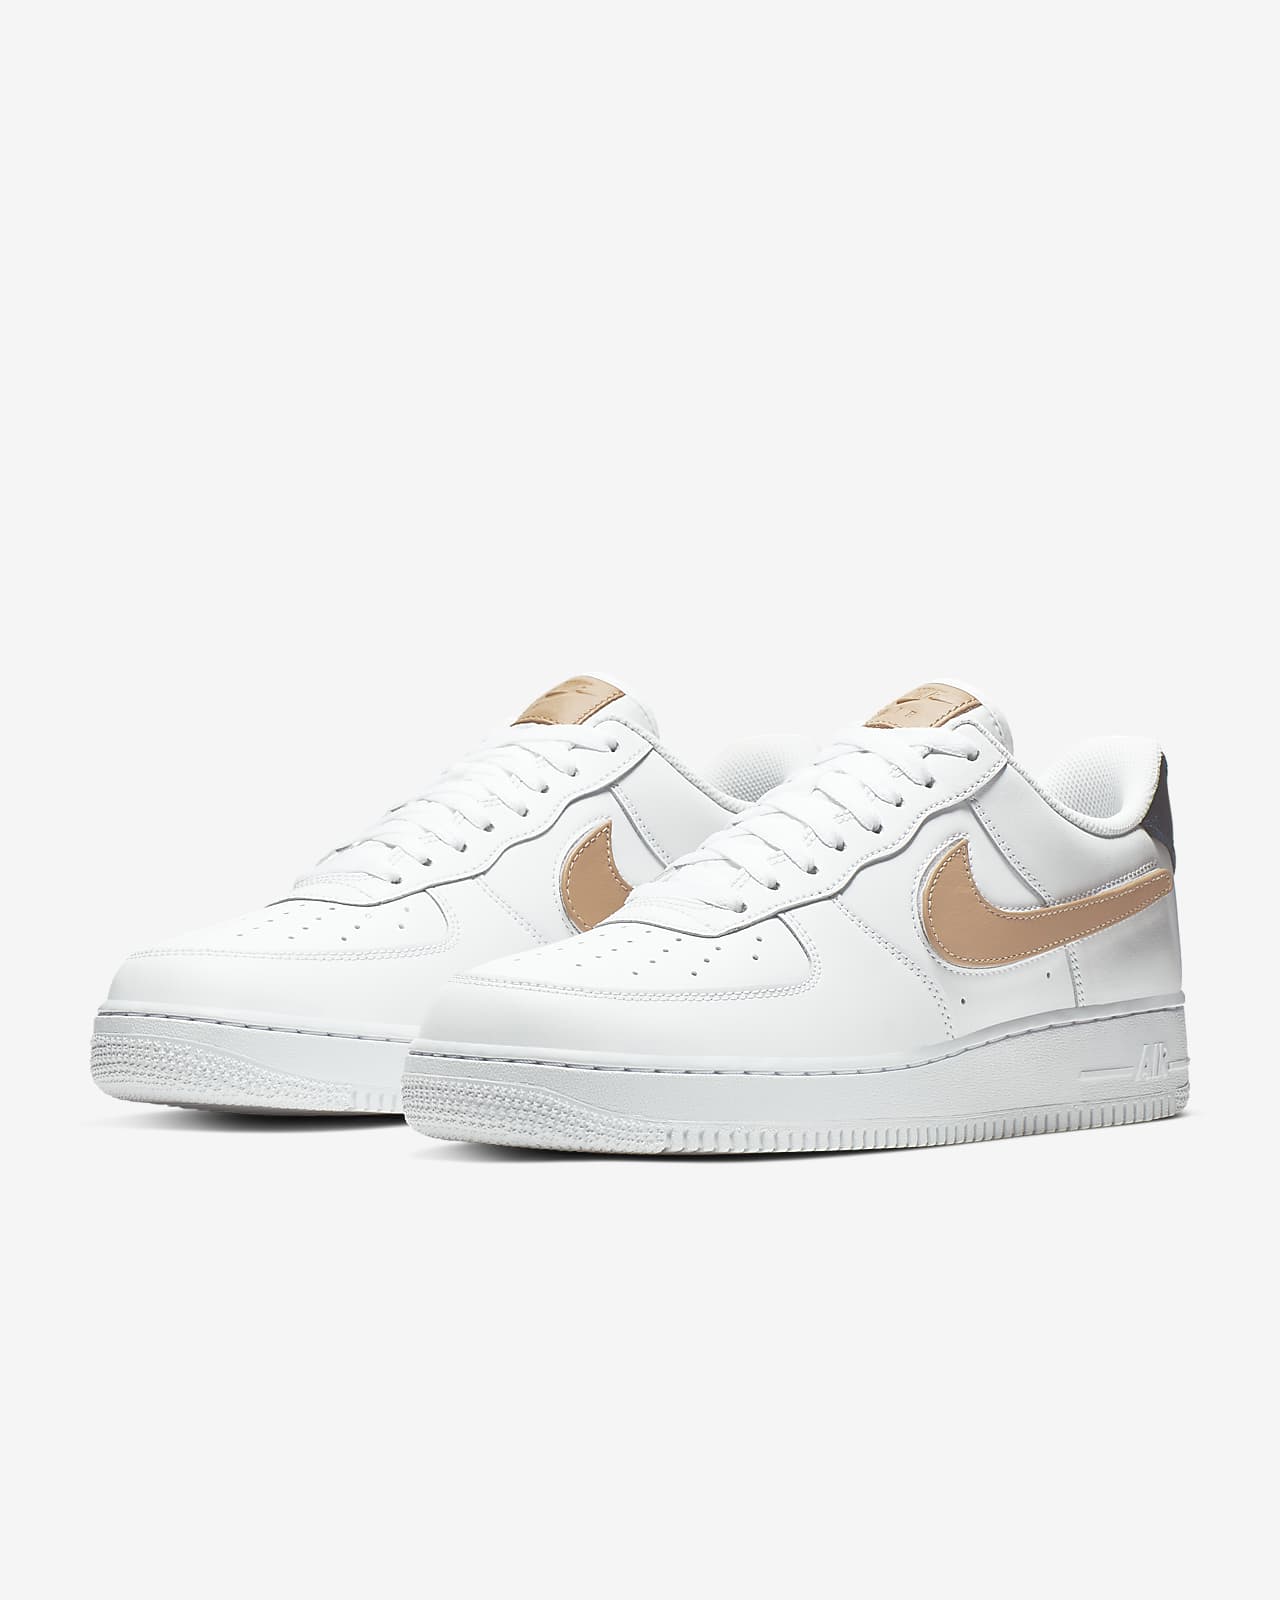 af1 with removable swoosh